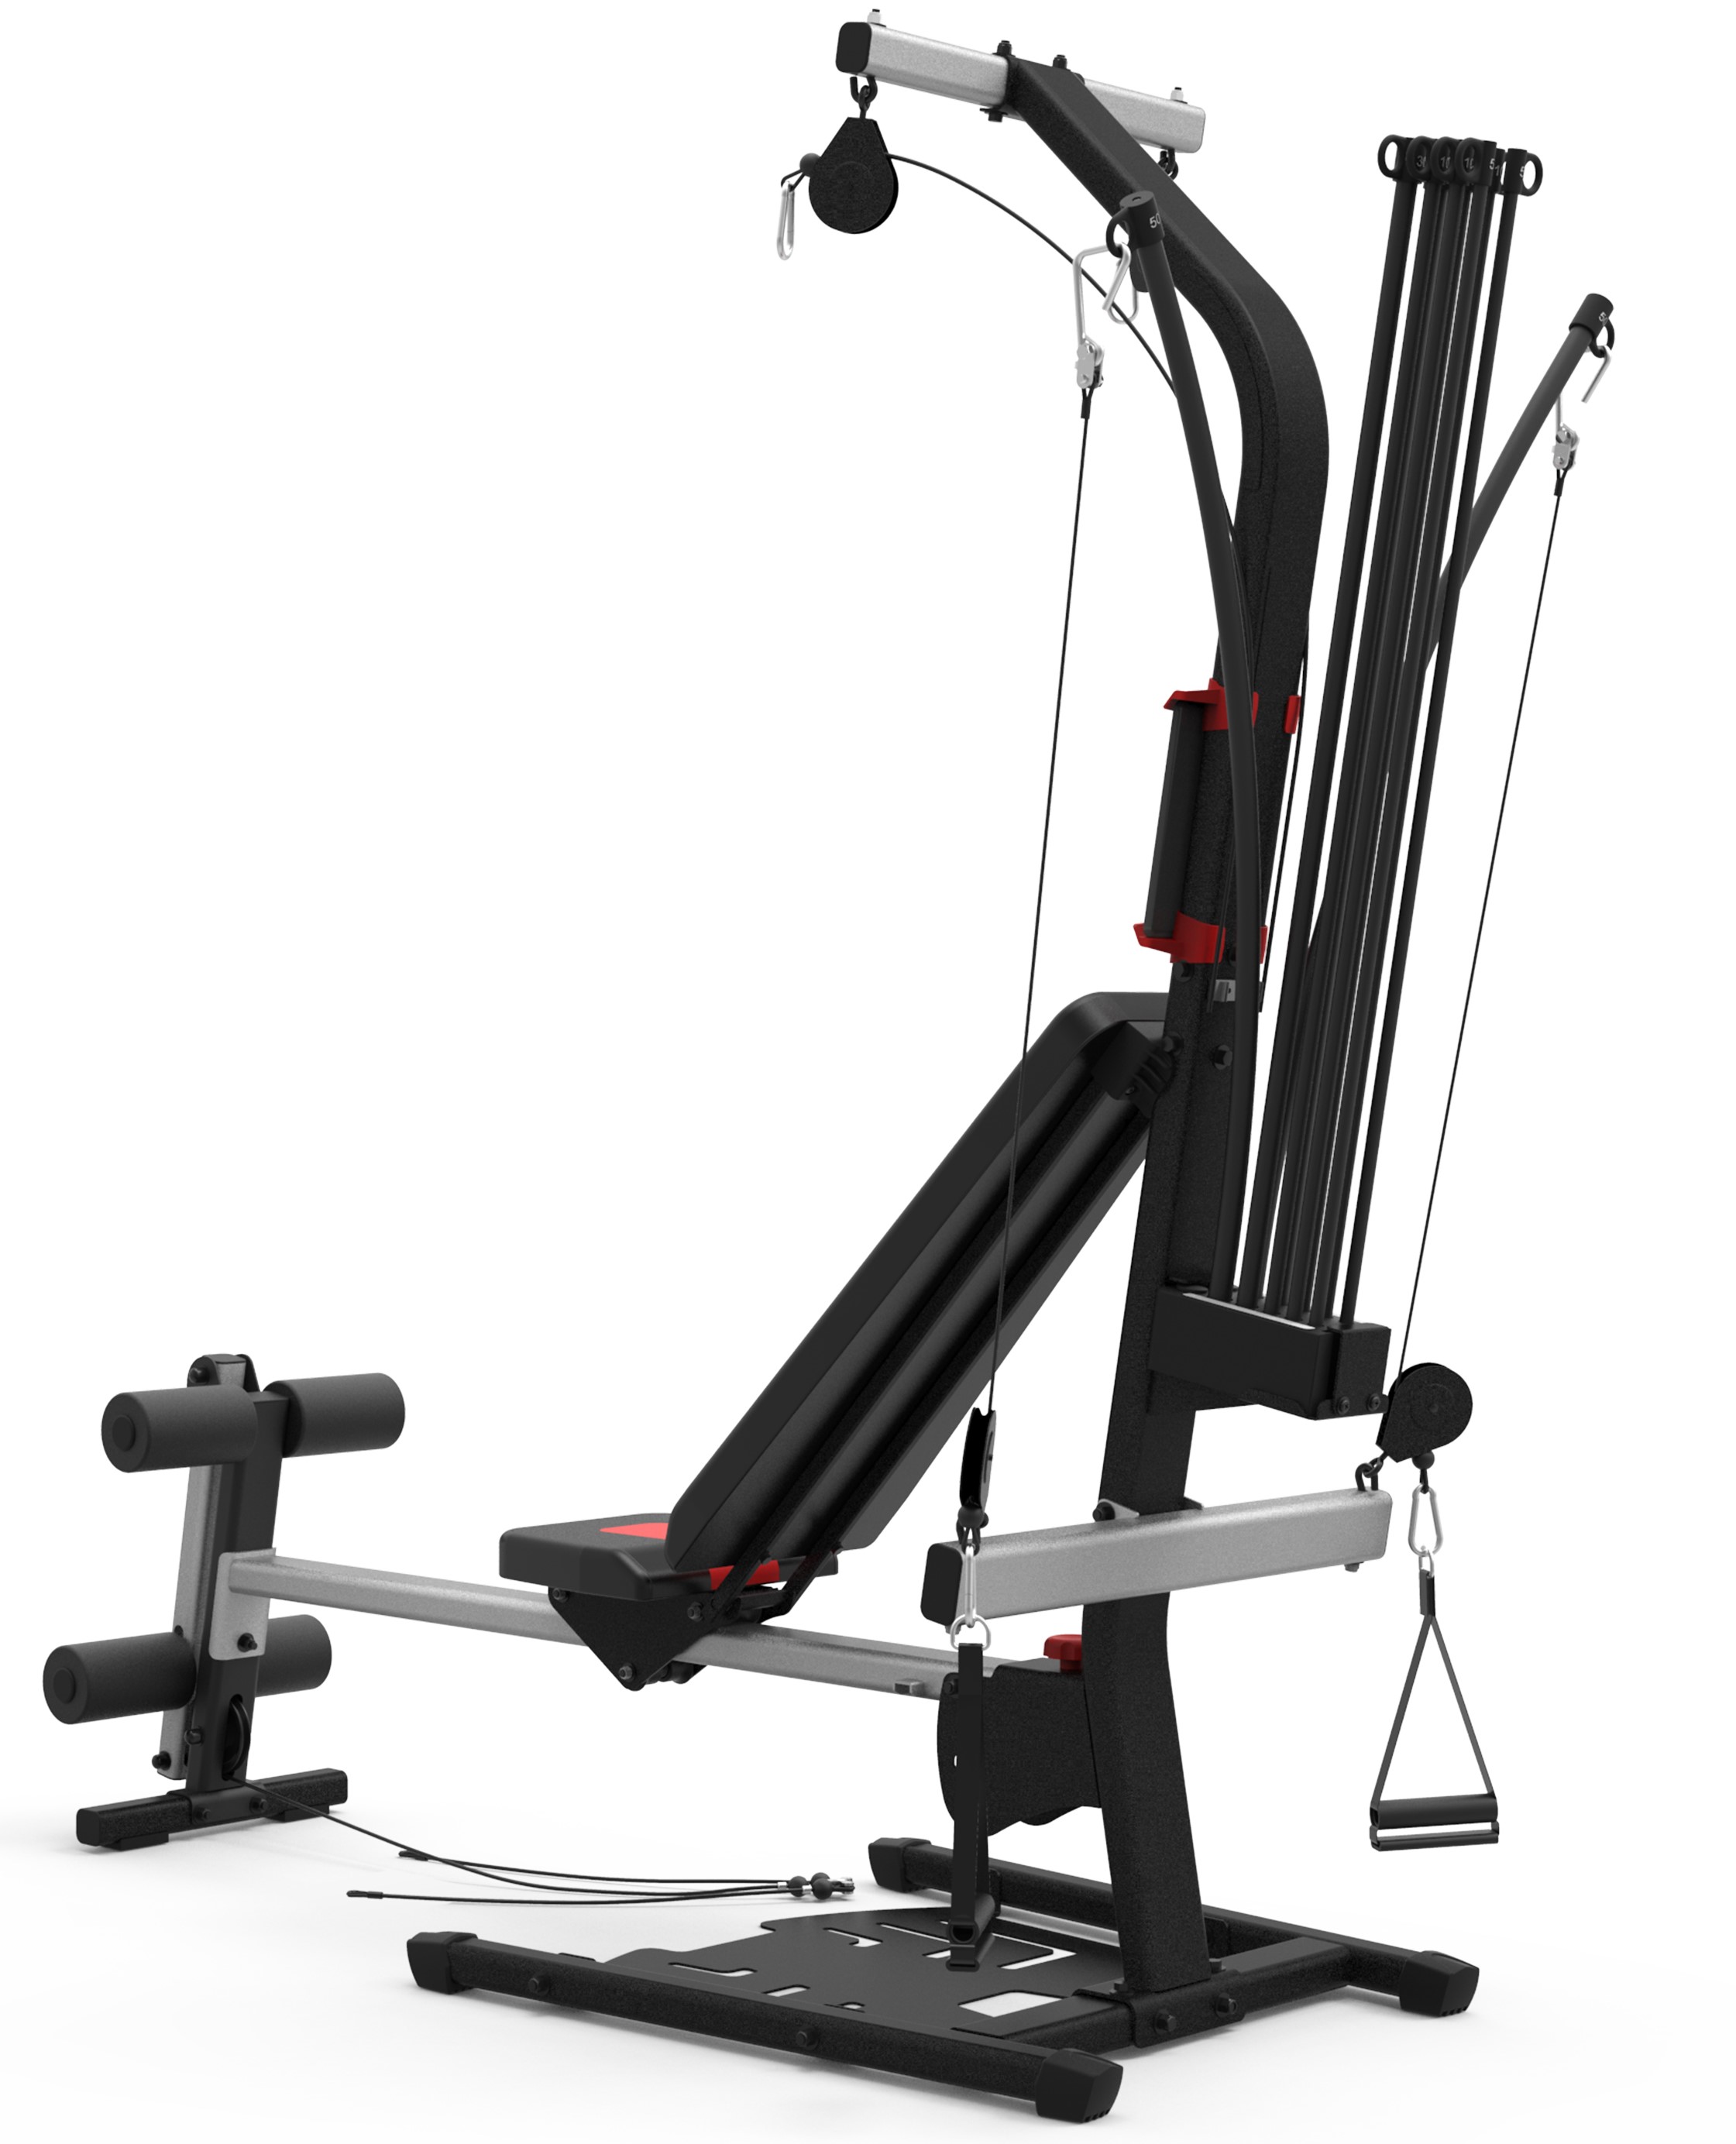 Bowflex PR1000 Home Gym Weight Lifting Aerobic Rowing and Vertical Folding Bench - image 5 of 10